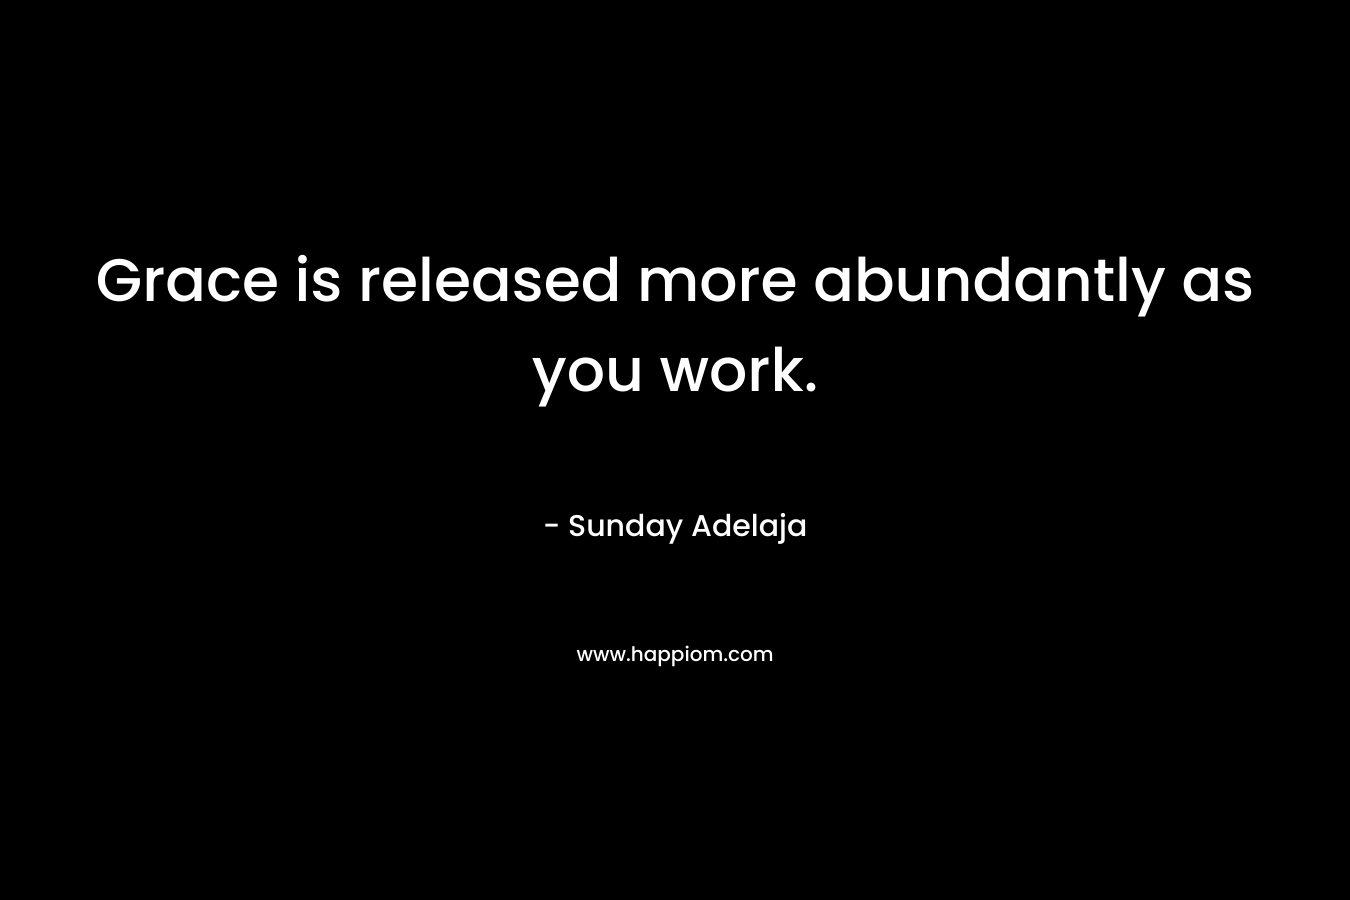 Grace is released more abundantly as you work.